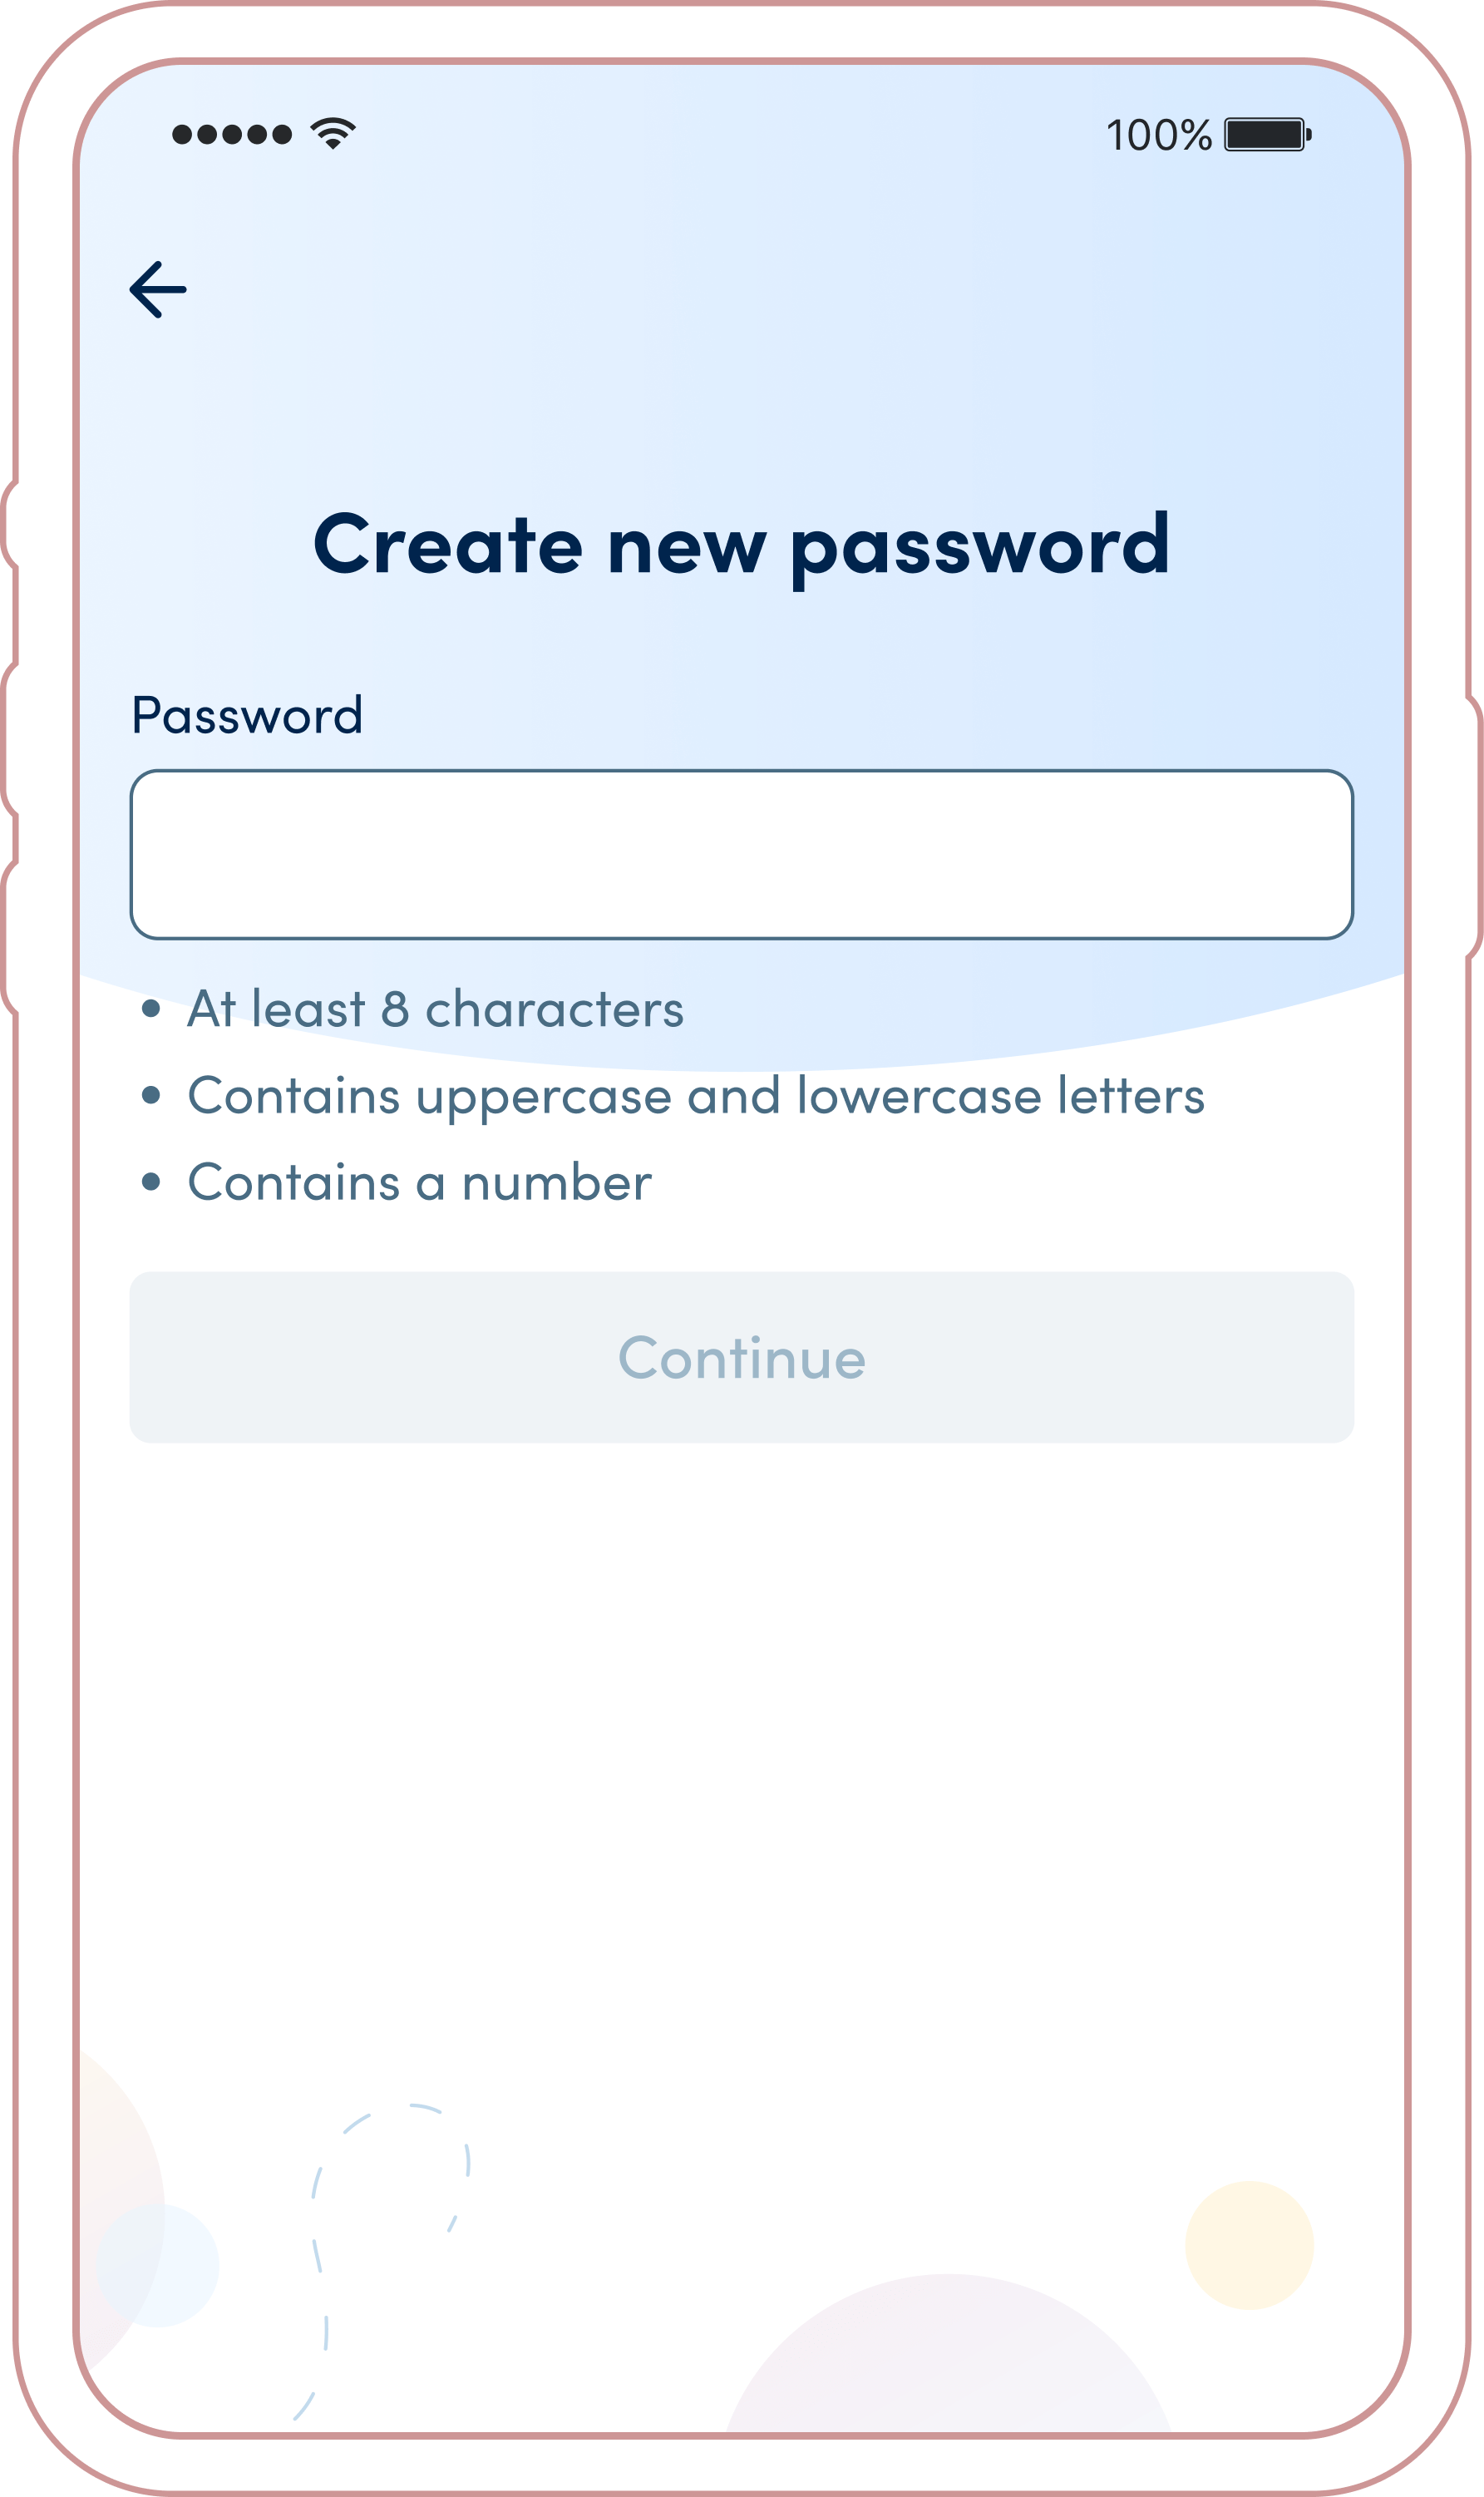 Create New Password screen for returning users in the K Health app